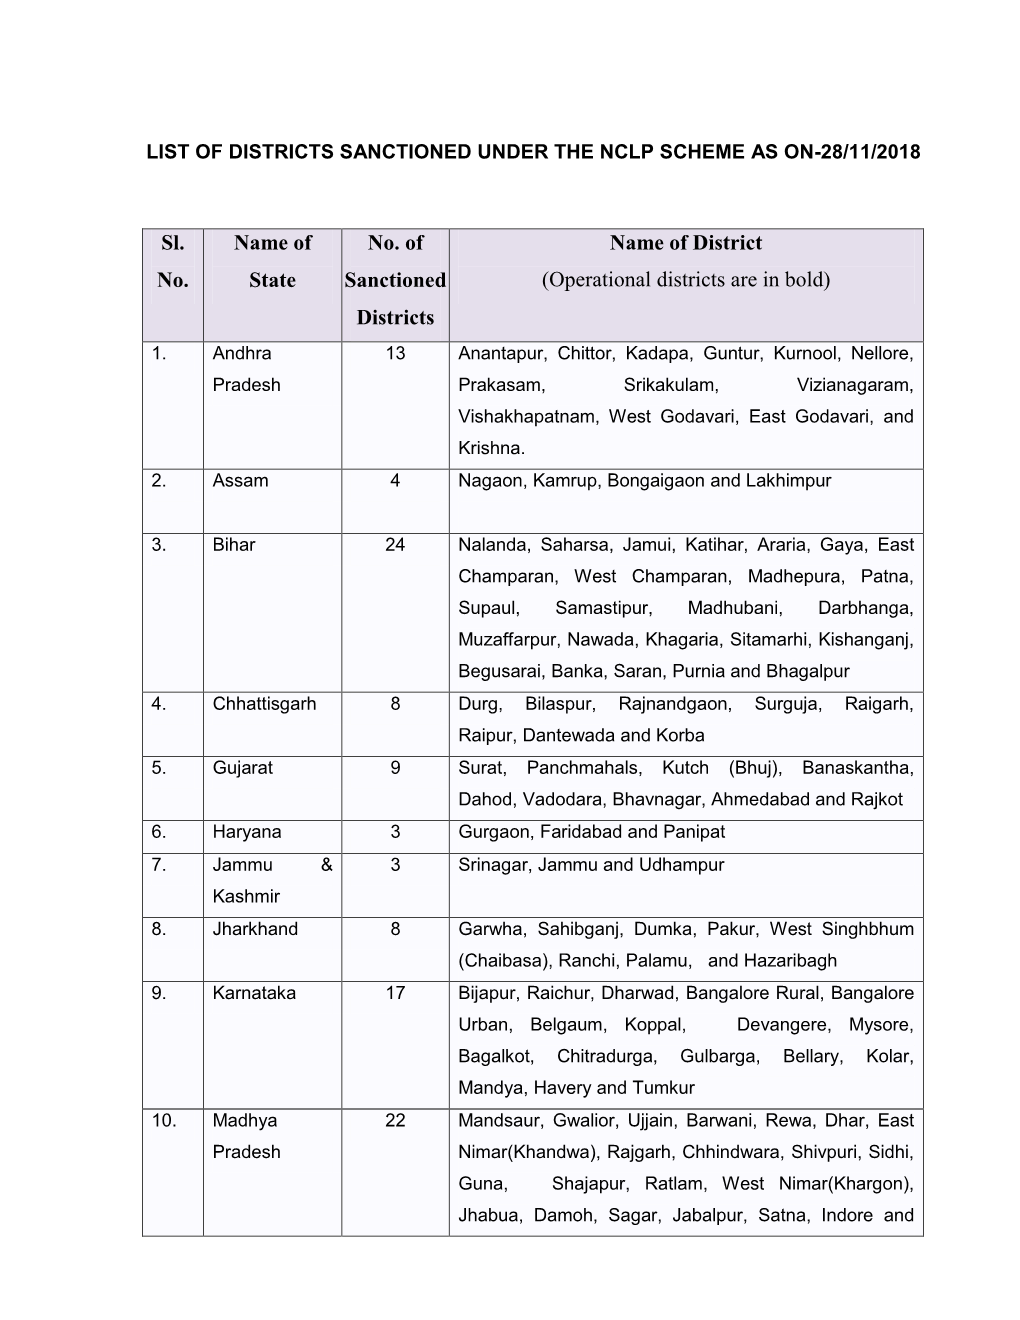 Sl. No. Name of State No. of Sanctioned Districts Name of District